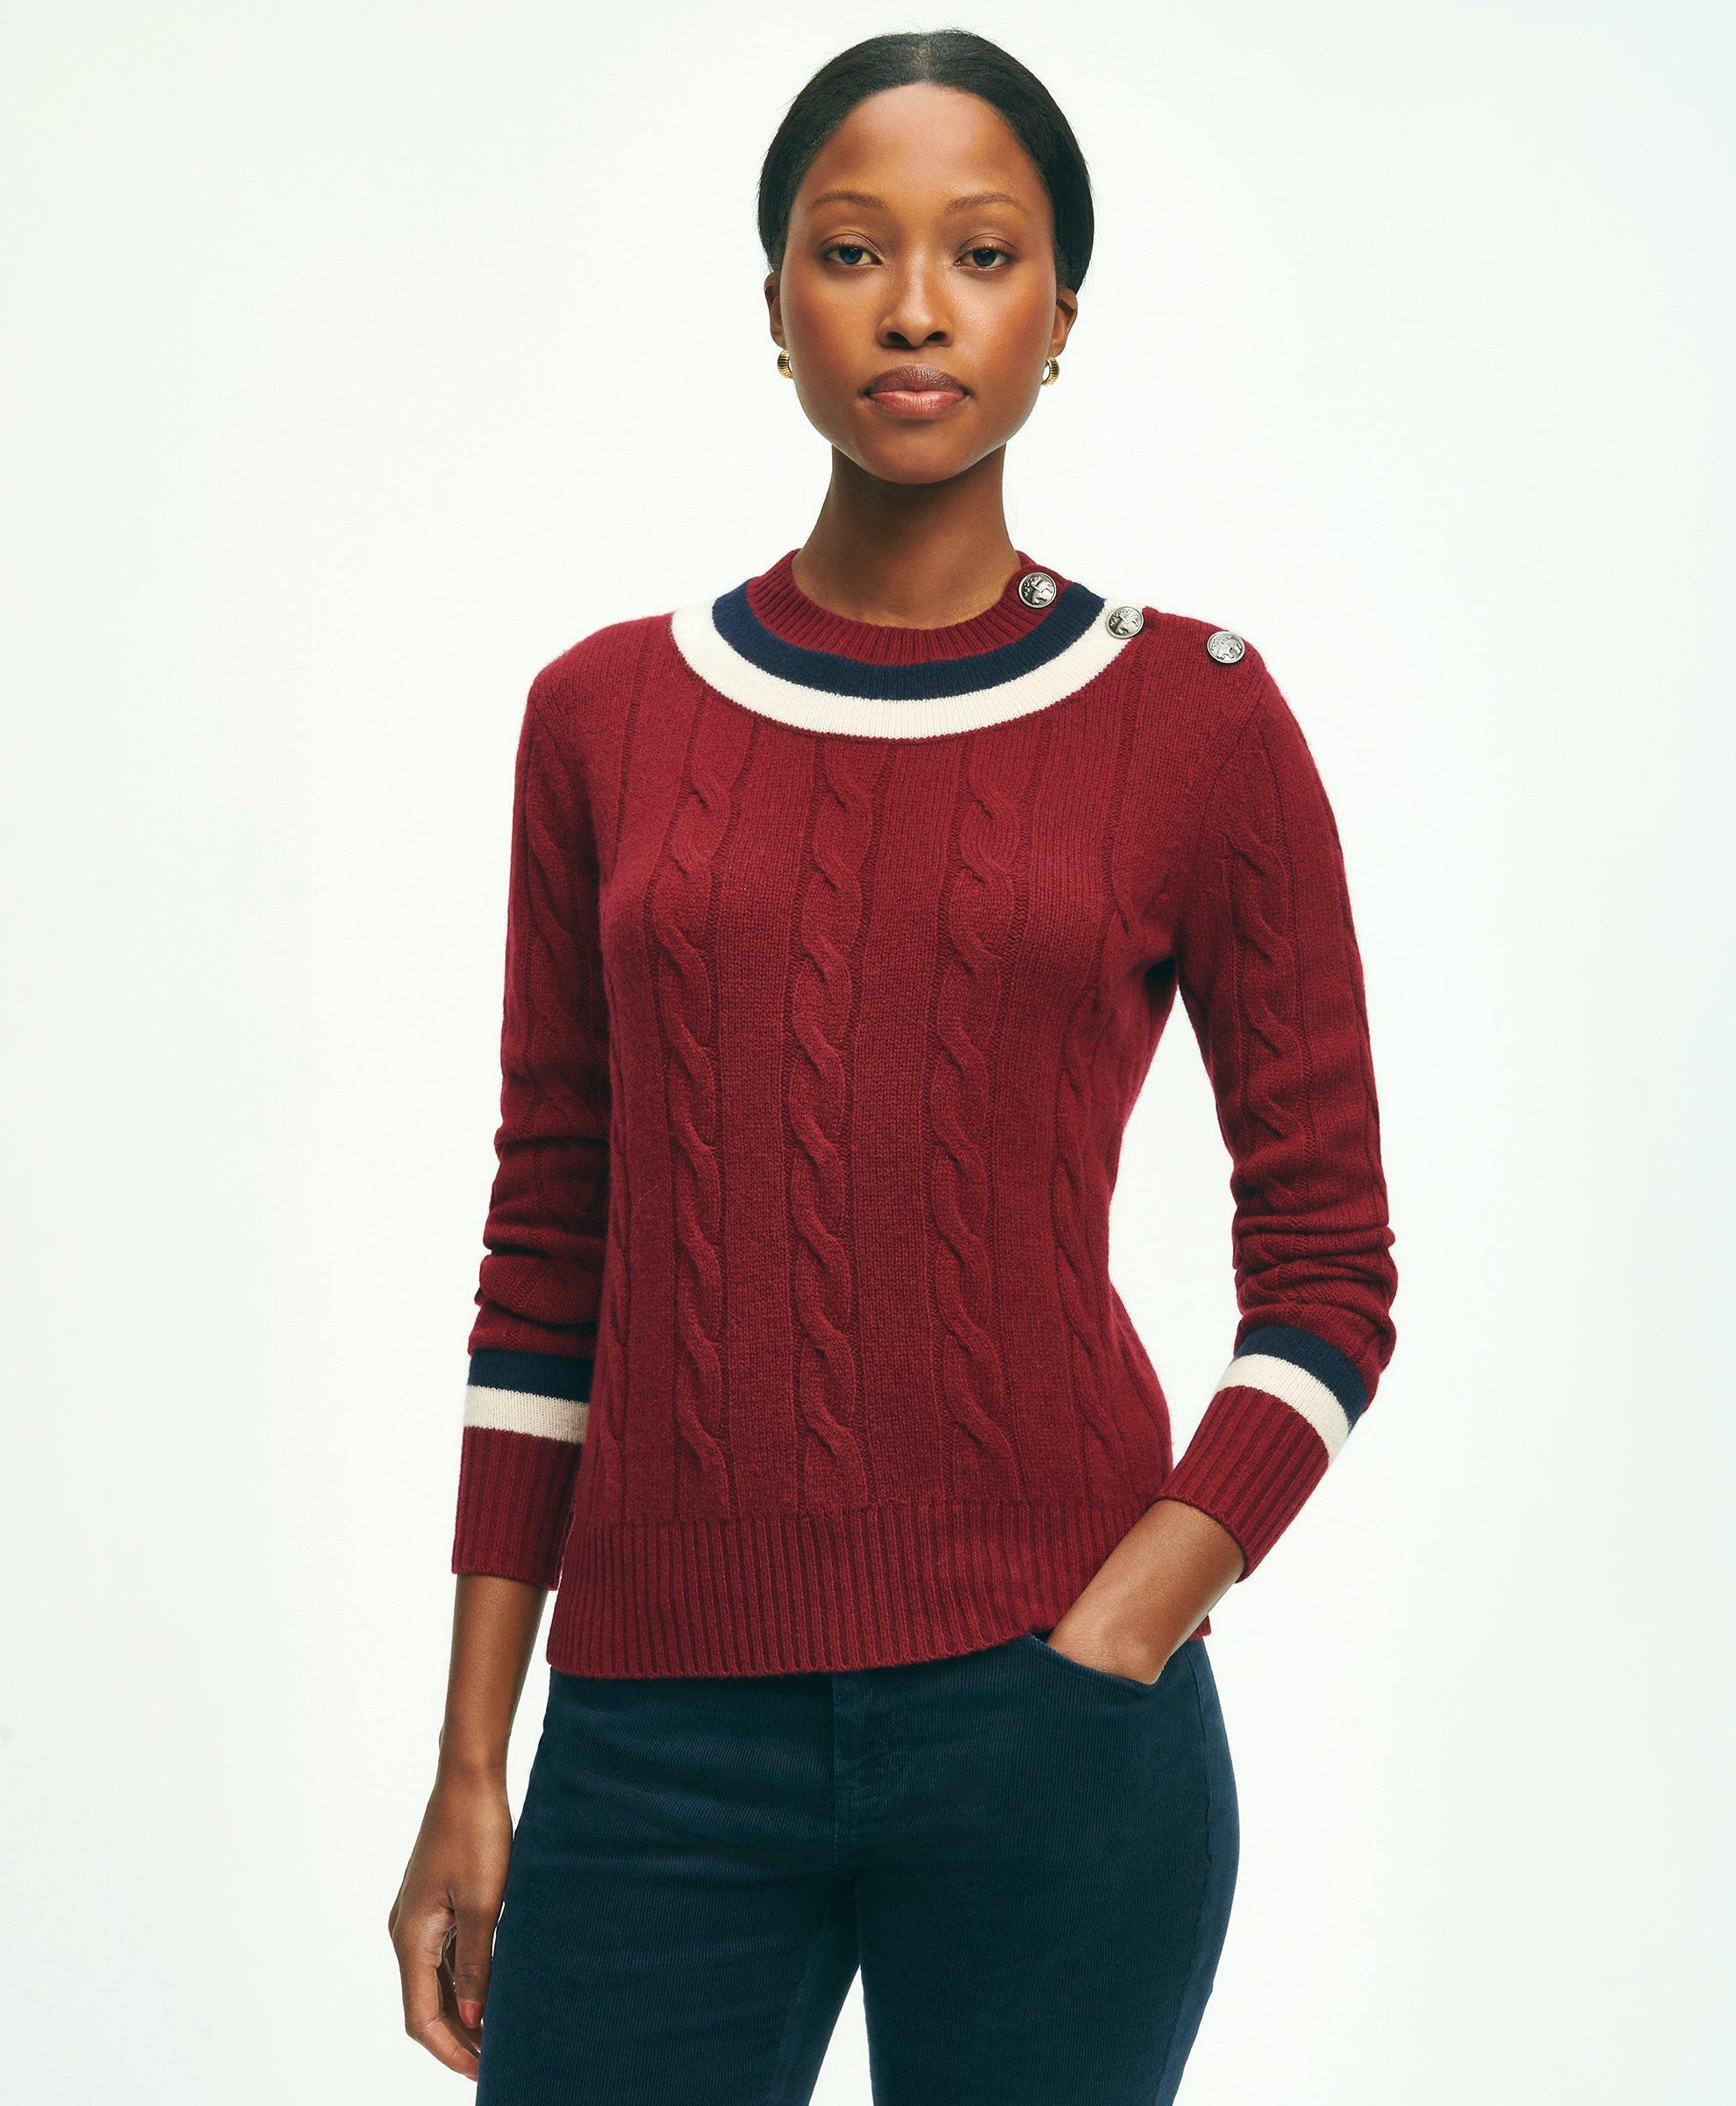 POLO RALPH LAUREN Womens Sweater 2X High Neck Wool Cashmere Mix Knit Red  Top NWT $99.99 - PicClick